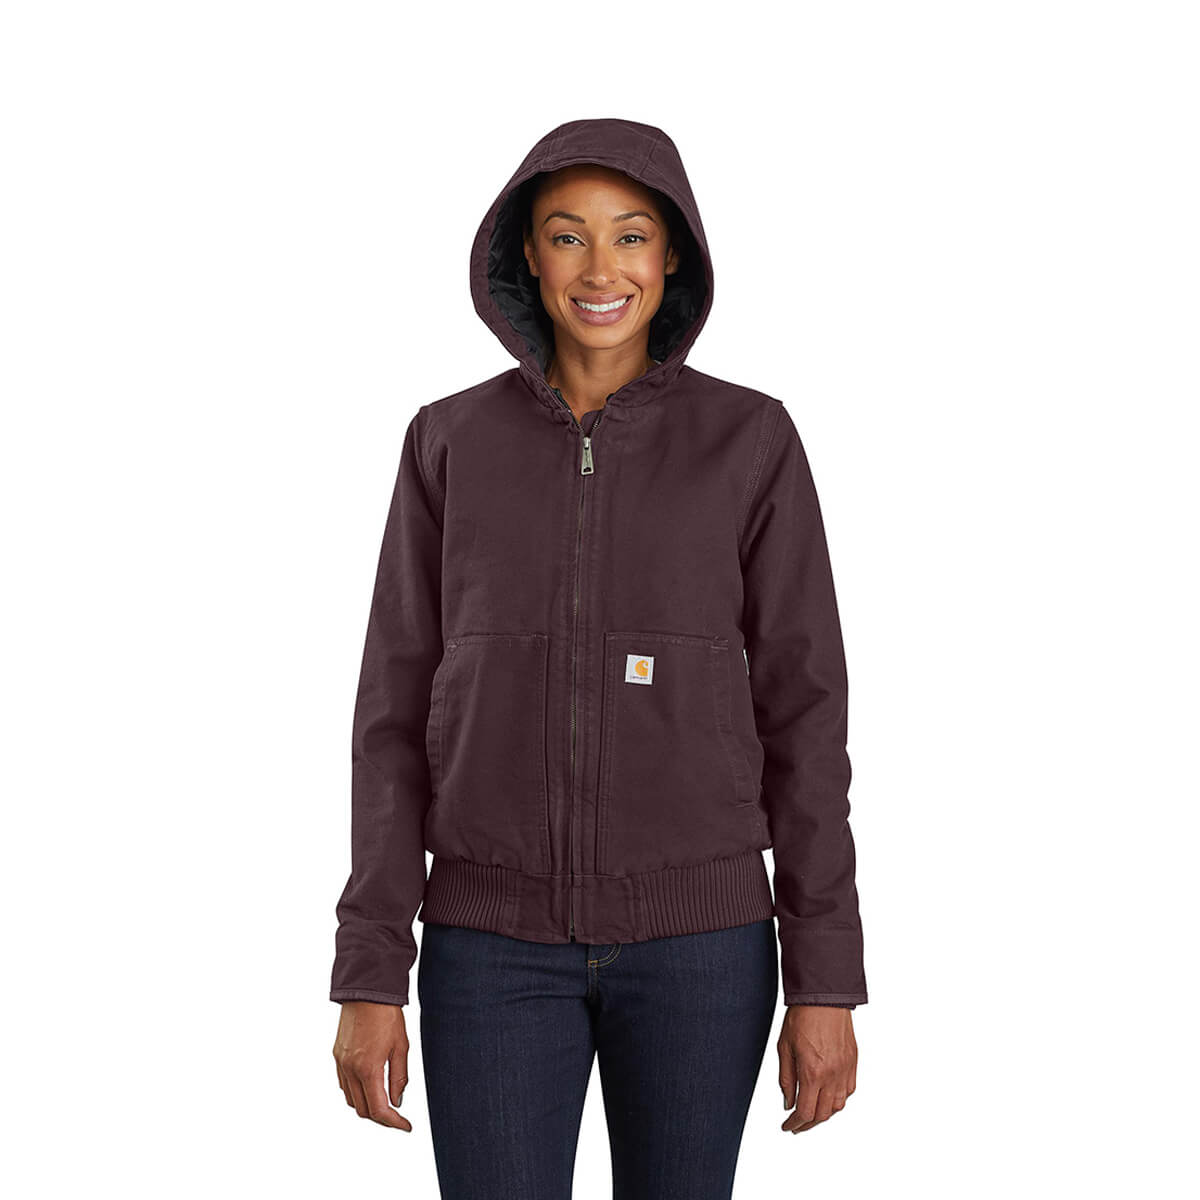 Carhartt Women's Loose Fit Washed Duck Insulated Active Jacket - Wine